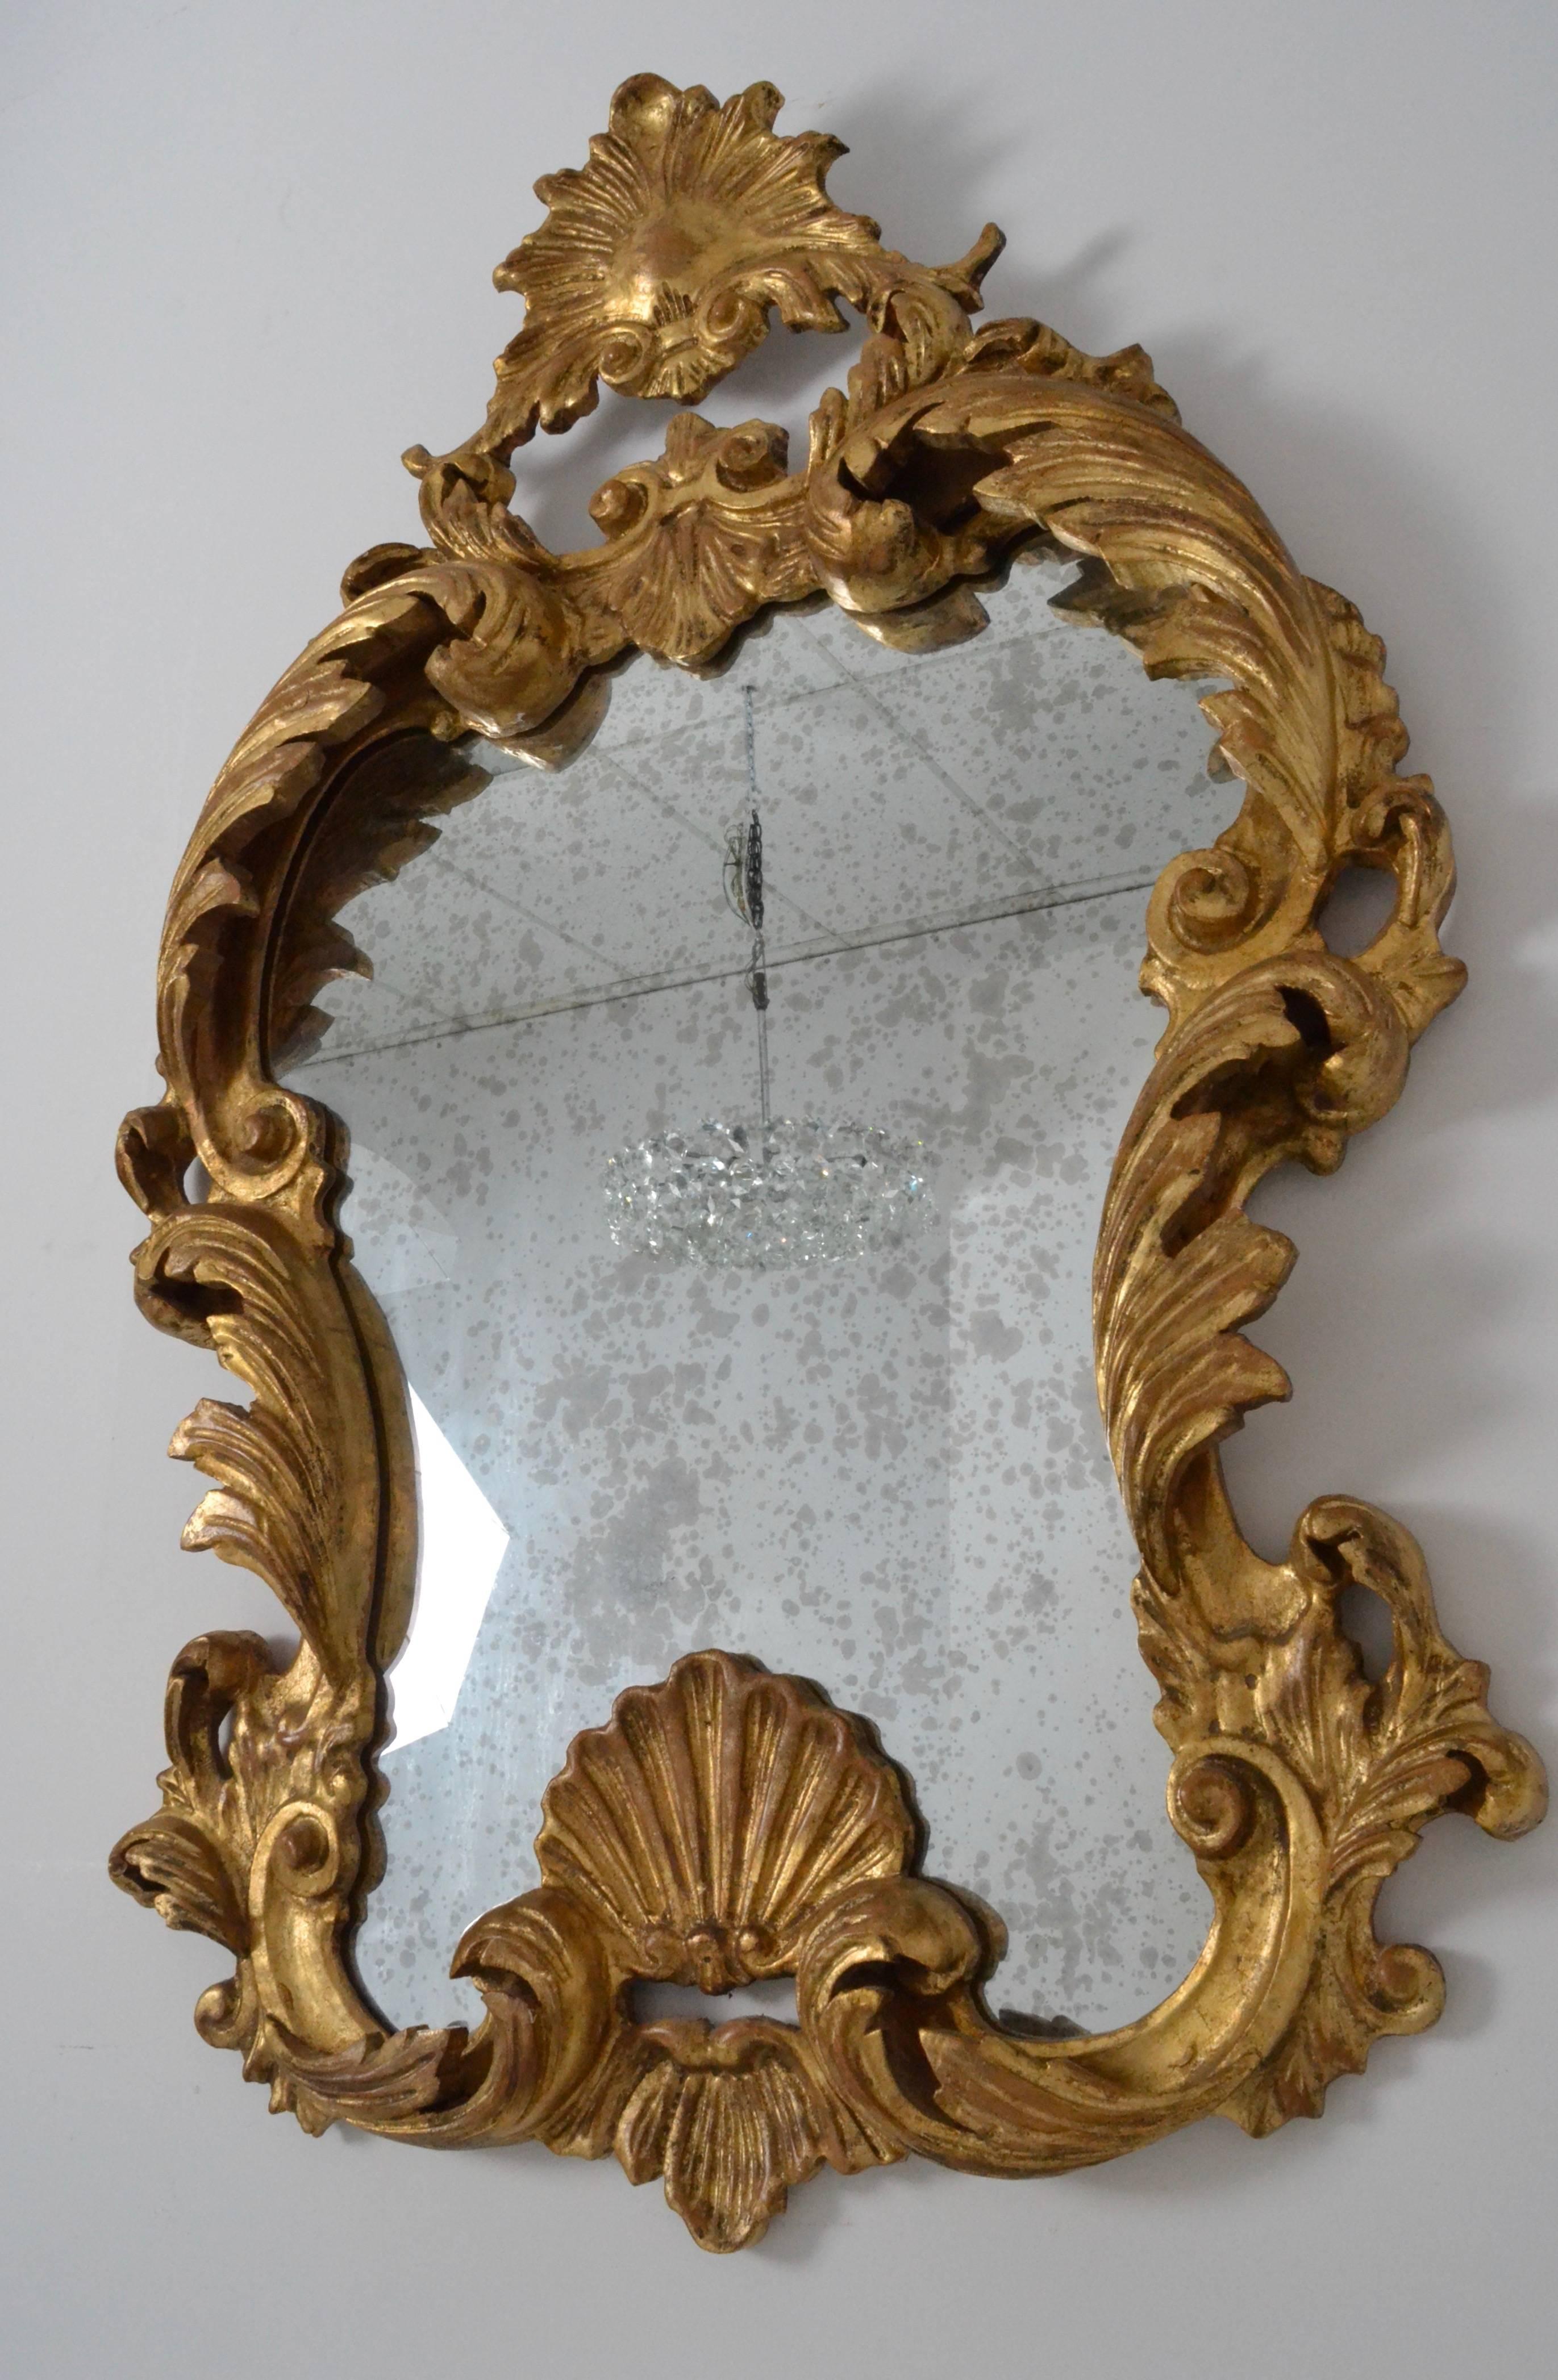 Beautifully figured Rococo style mirror with deep and fine carving. Warm gilded finish.